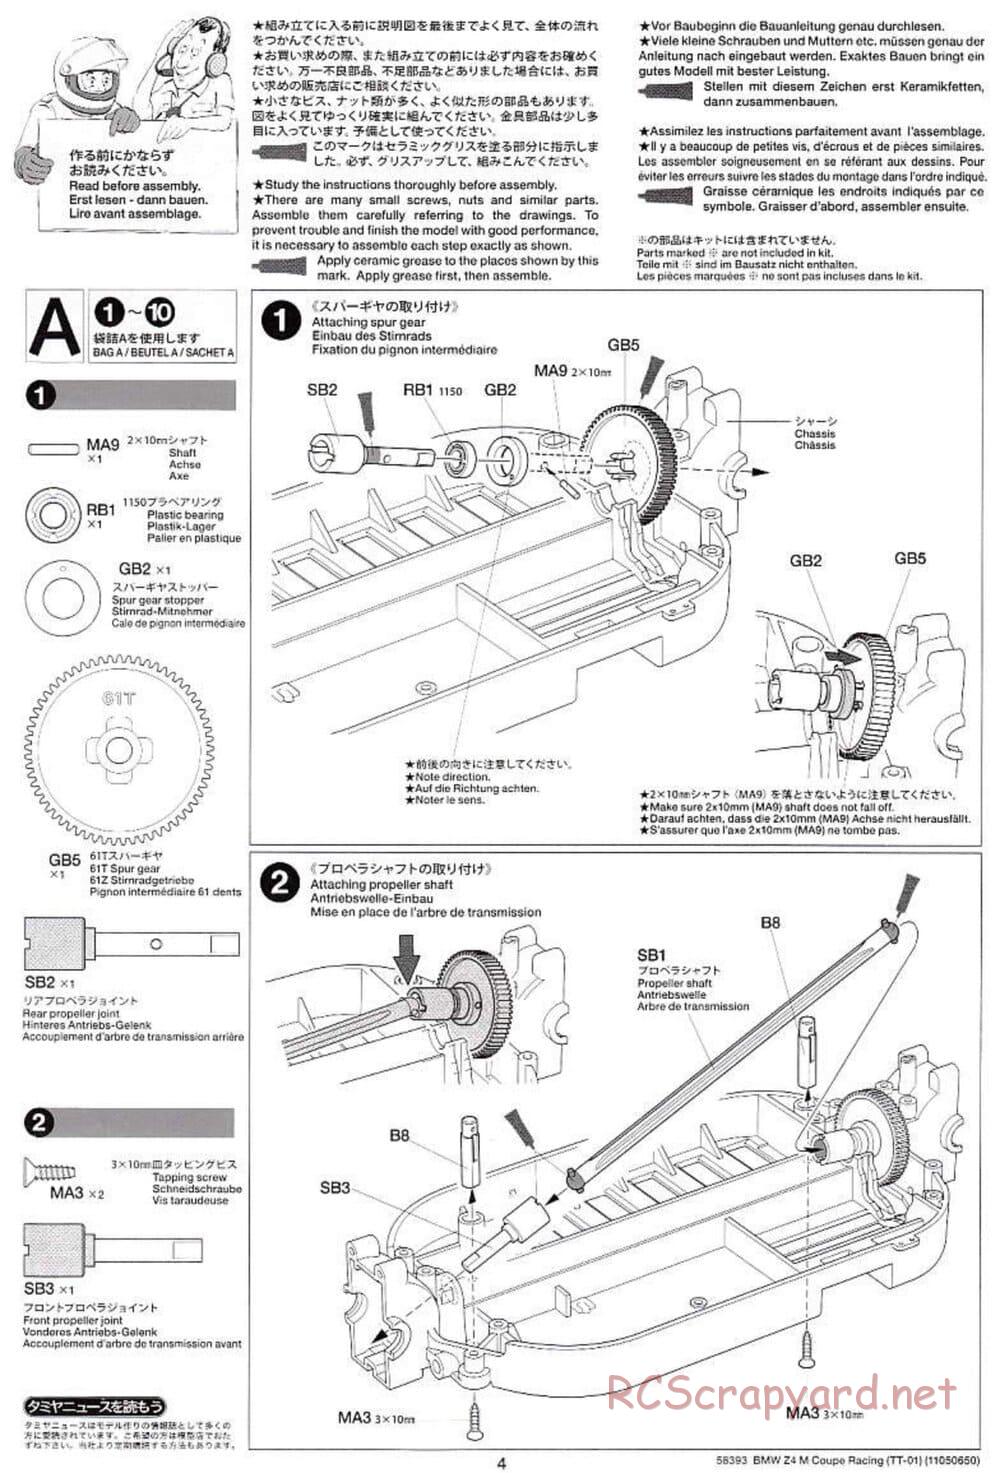 Tamiya - BMW Z4 M Coupe Racing - TT-01 Chassis - Manual - Page 4